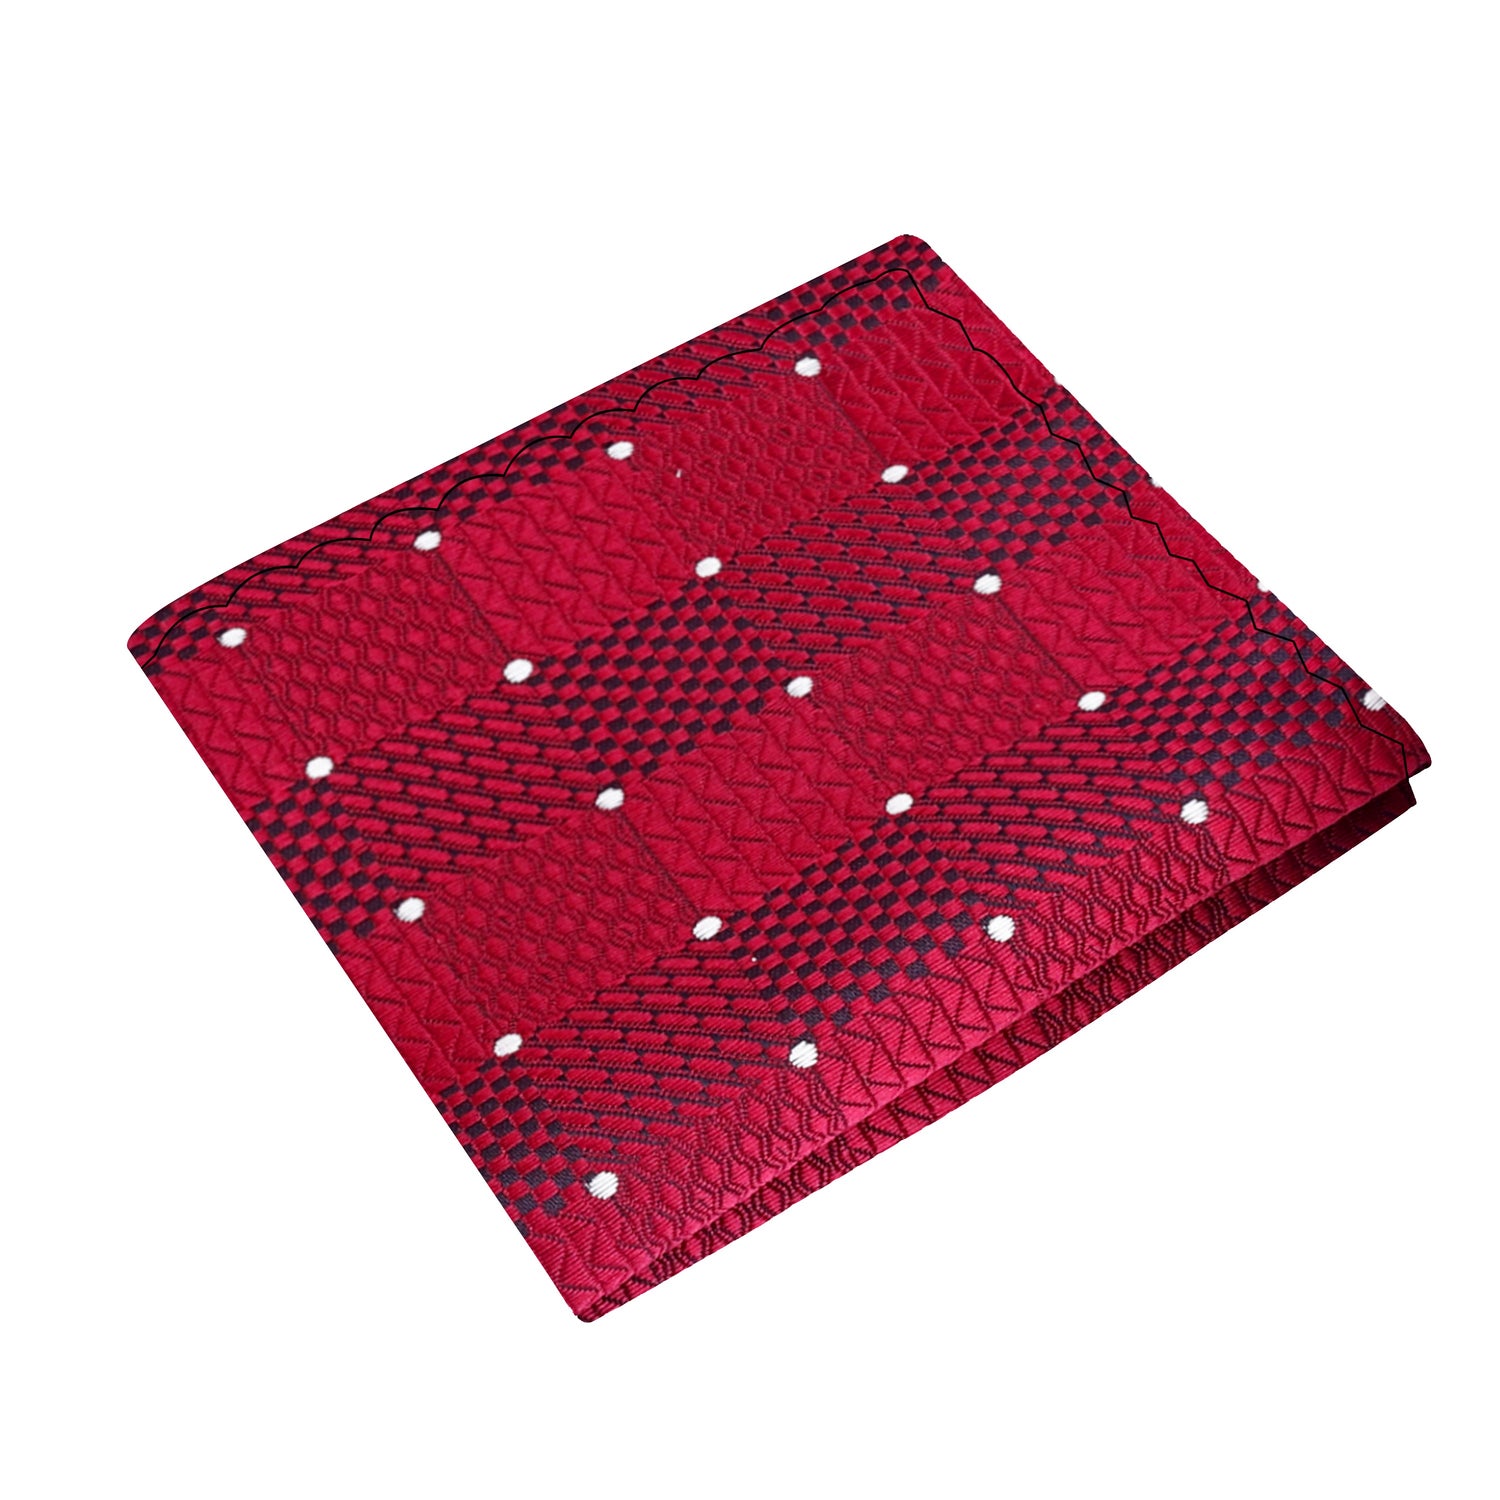 A Burgundy, White Color Geometric Check with Small Dot Pocket Square